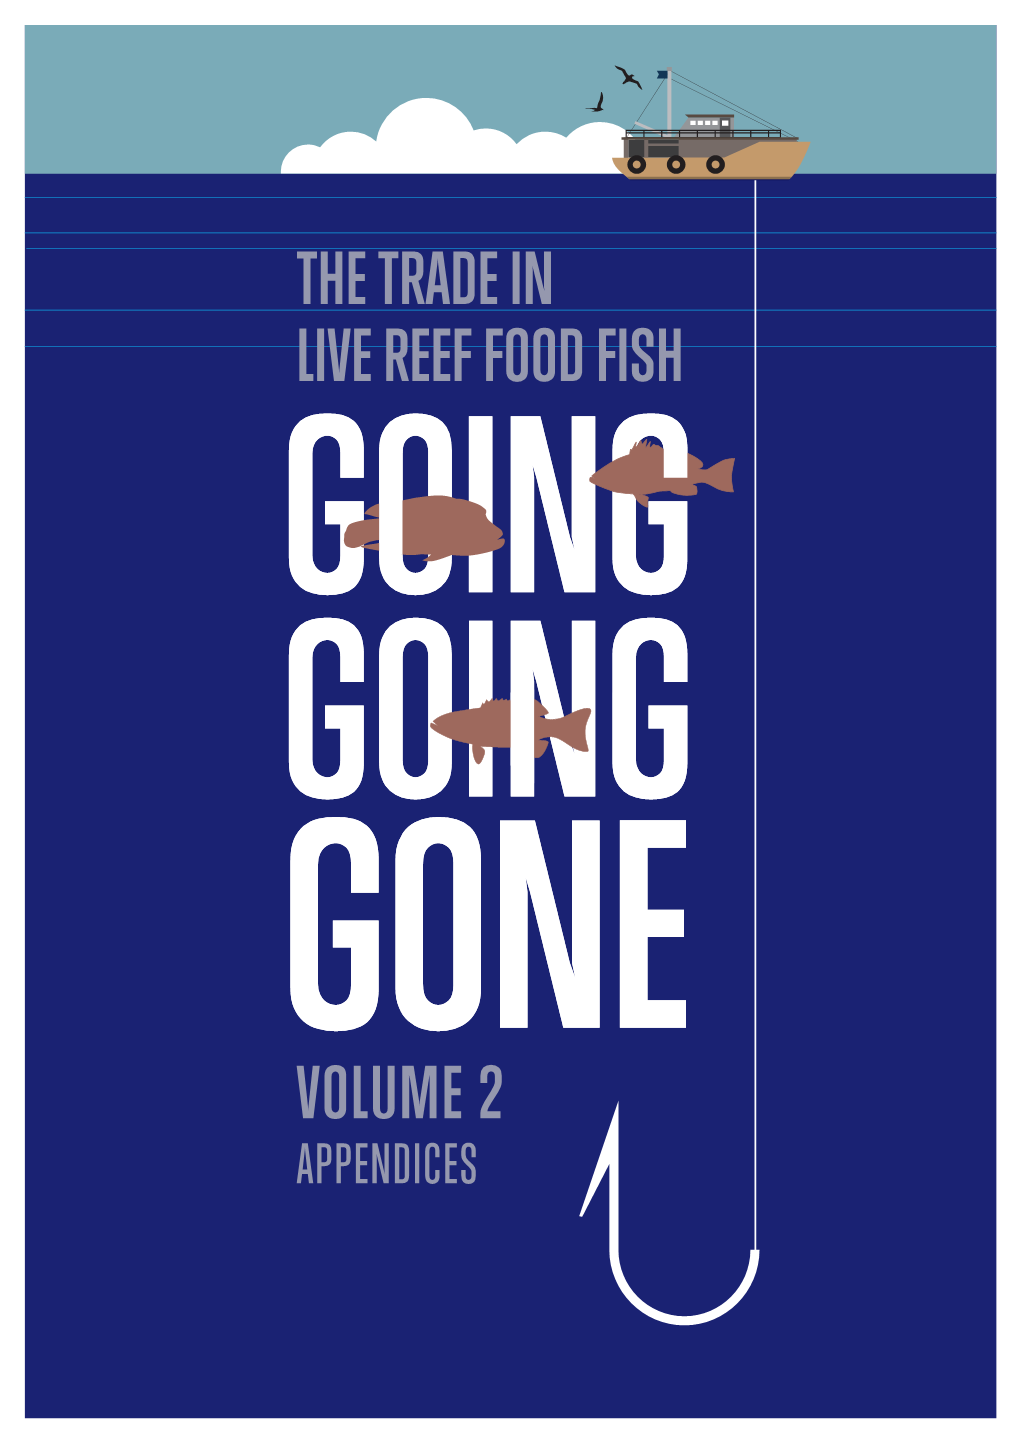 The Trade in Live Reef Food Fish Volume 2